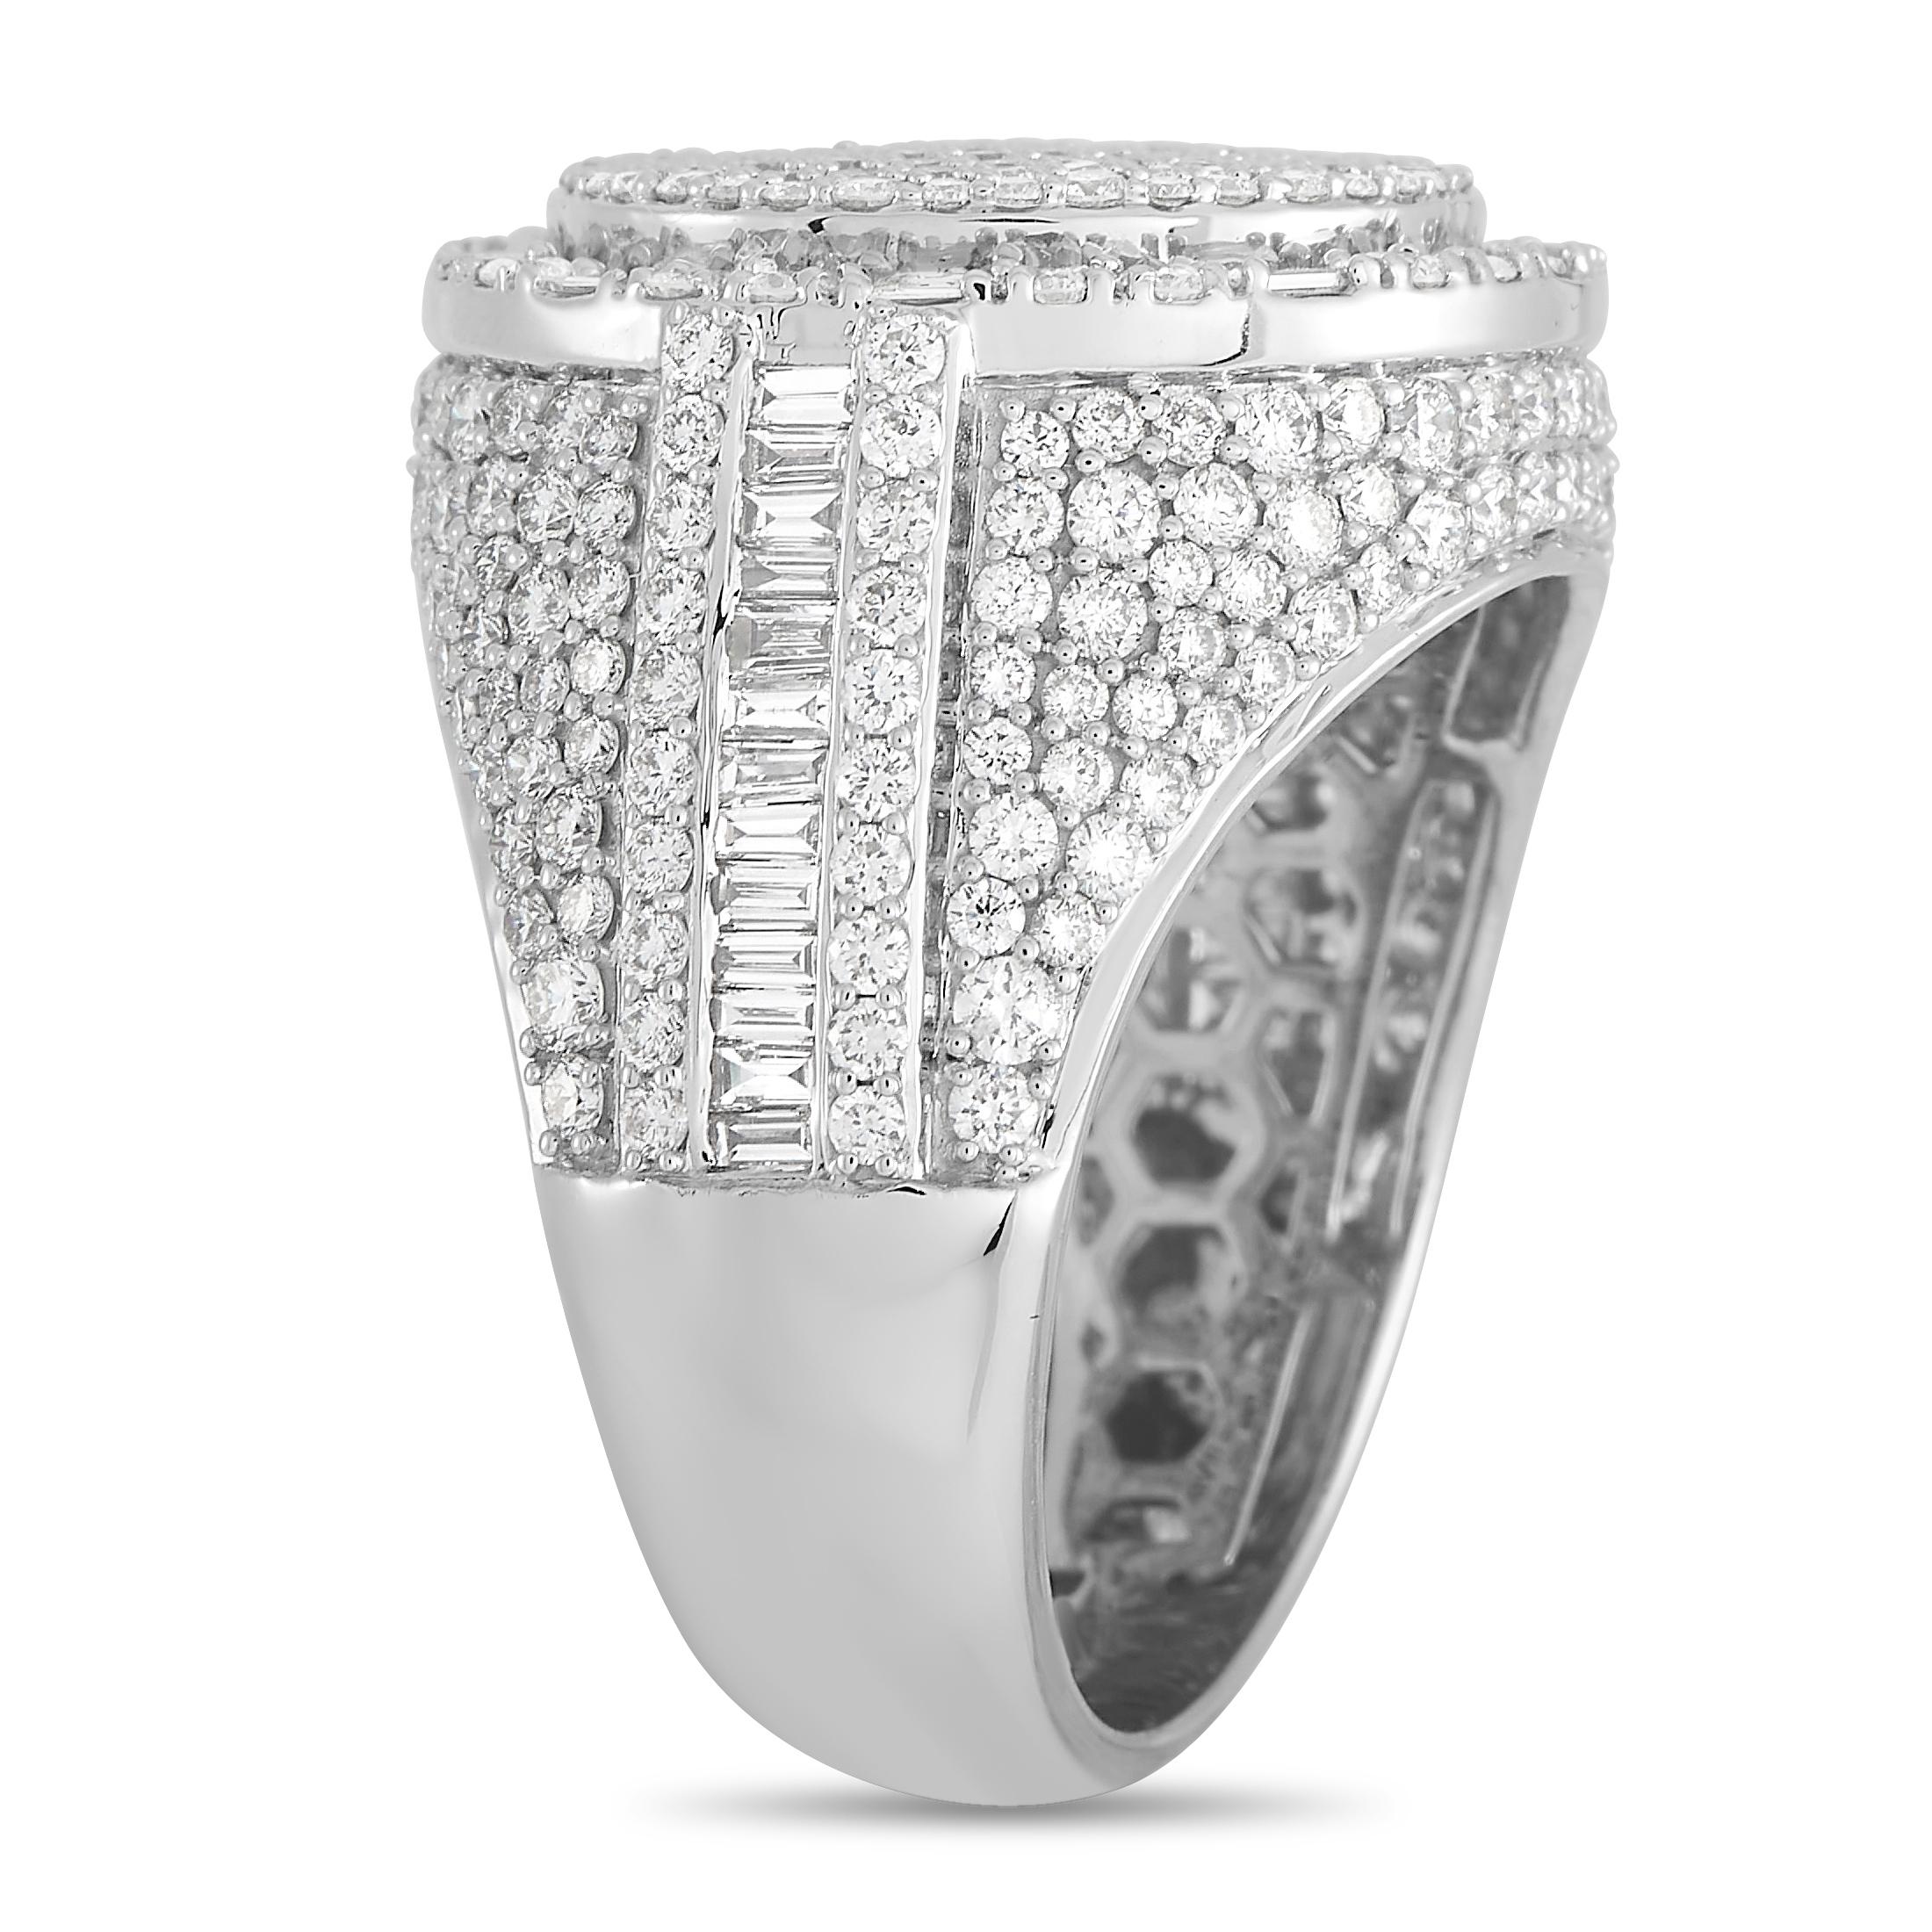 This LB Exclusive ring is sure to attract attention. The ring is made with 14K white gold and set with a number of round and baguette-cut diamonds on the face of the ring and over most of the band, for a total of 4.50 carats of diamonds over the